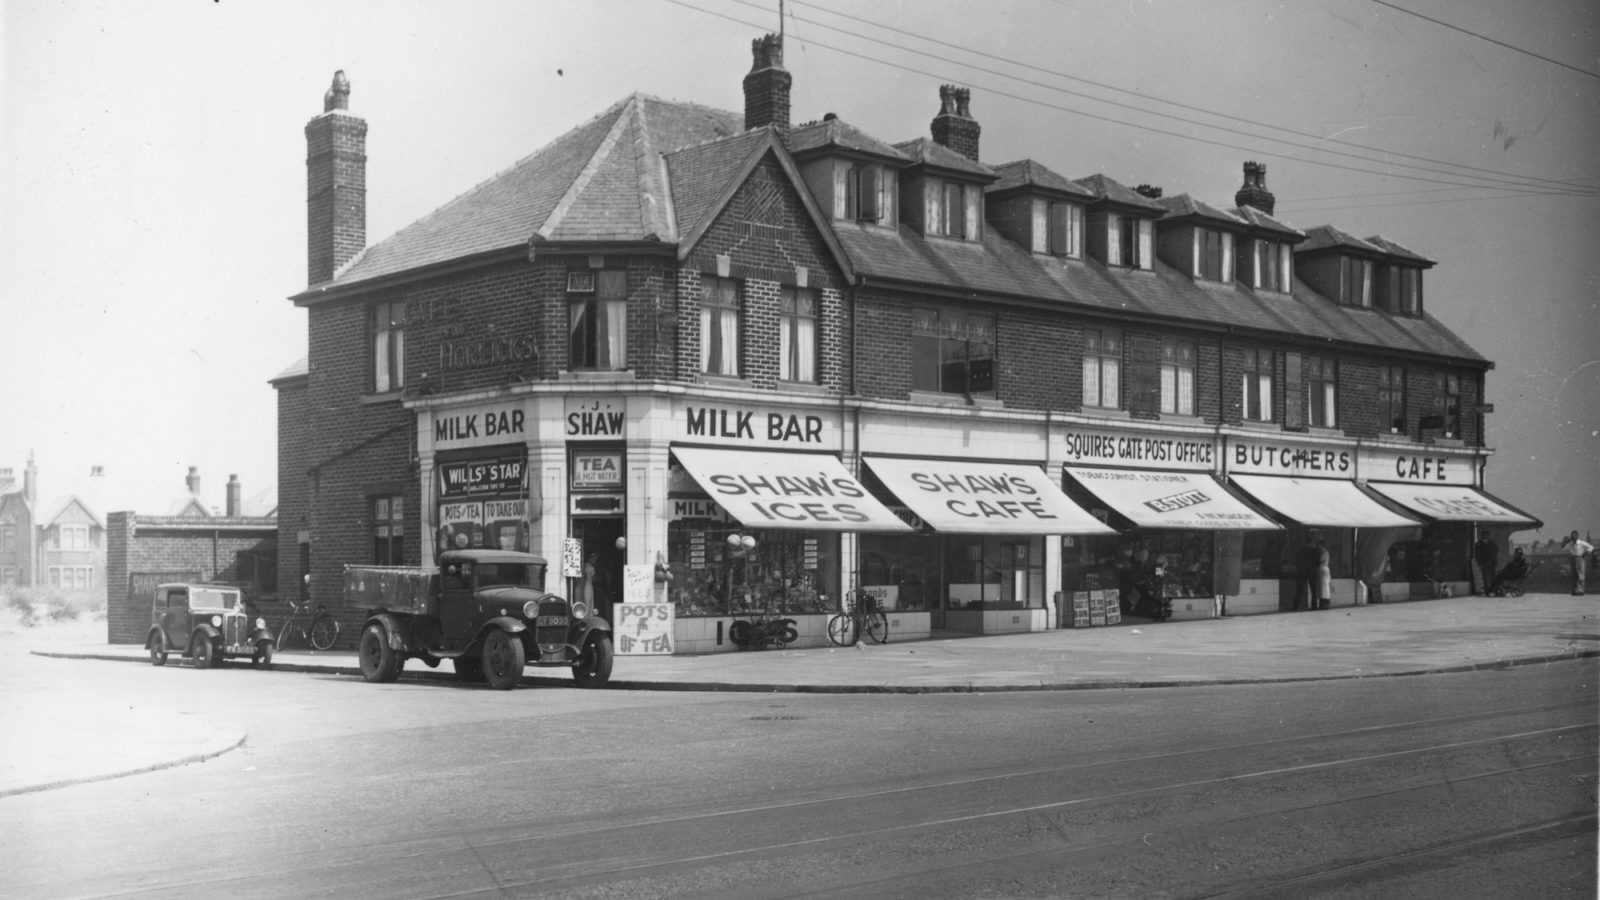 Row of shops, from left to right is the Milk Bar, Shaw's Ices, Shaw's Cafe, Squires Gate Post Office, Butchers and Cafe.